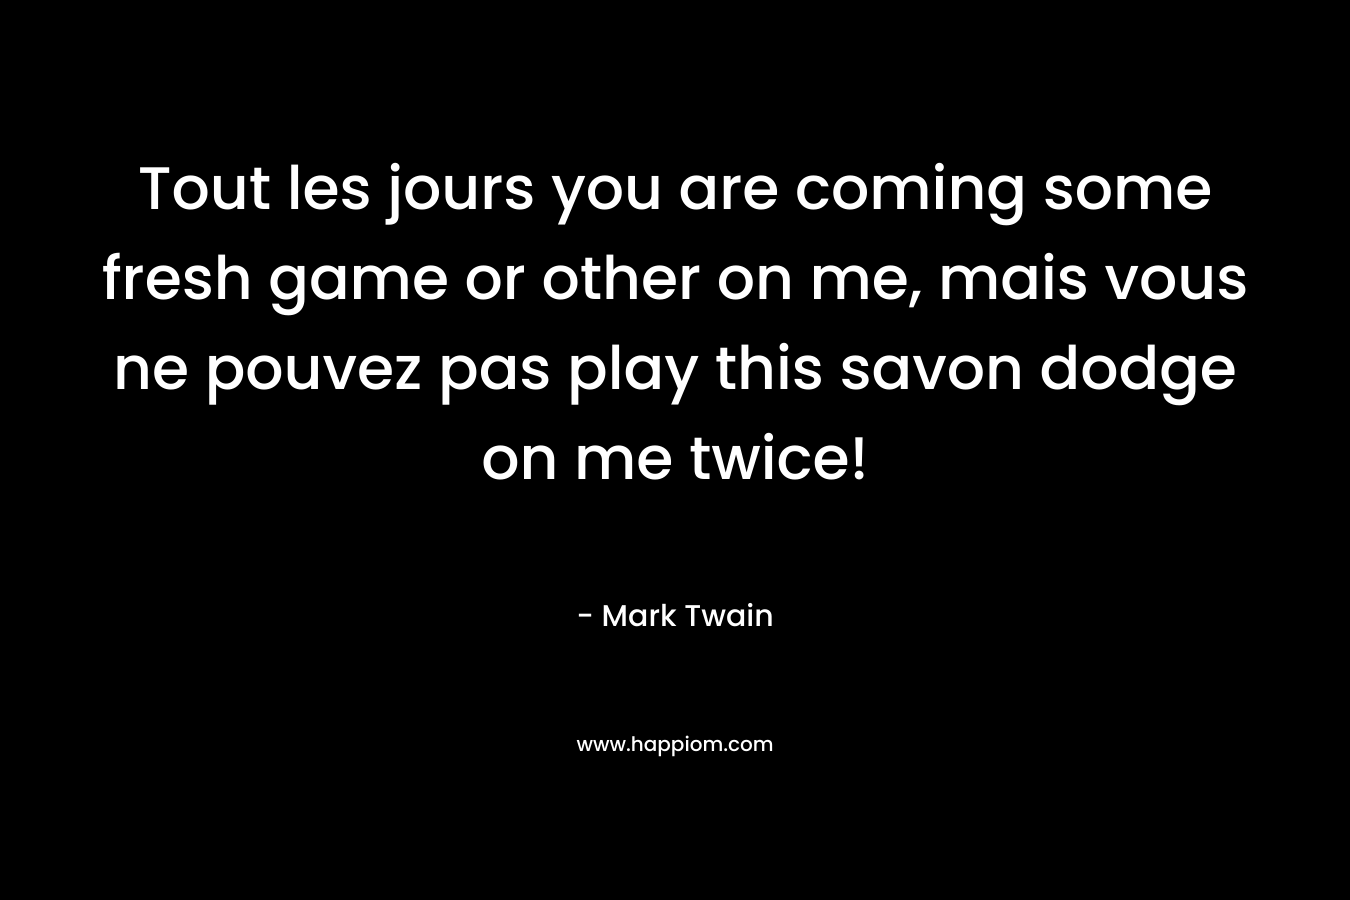 Tout les jours you are coming some fresh game or other on me, mais vous ne pouvez pas play this savon dodge on me twice! – Mark Twain